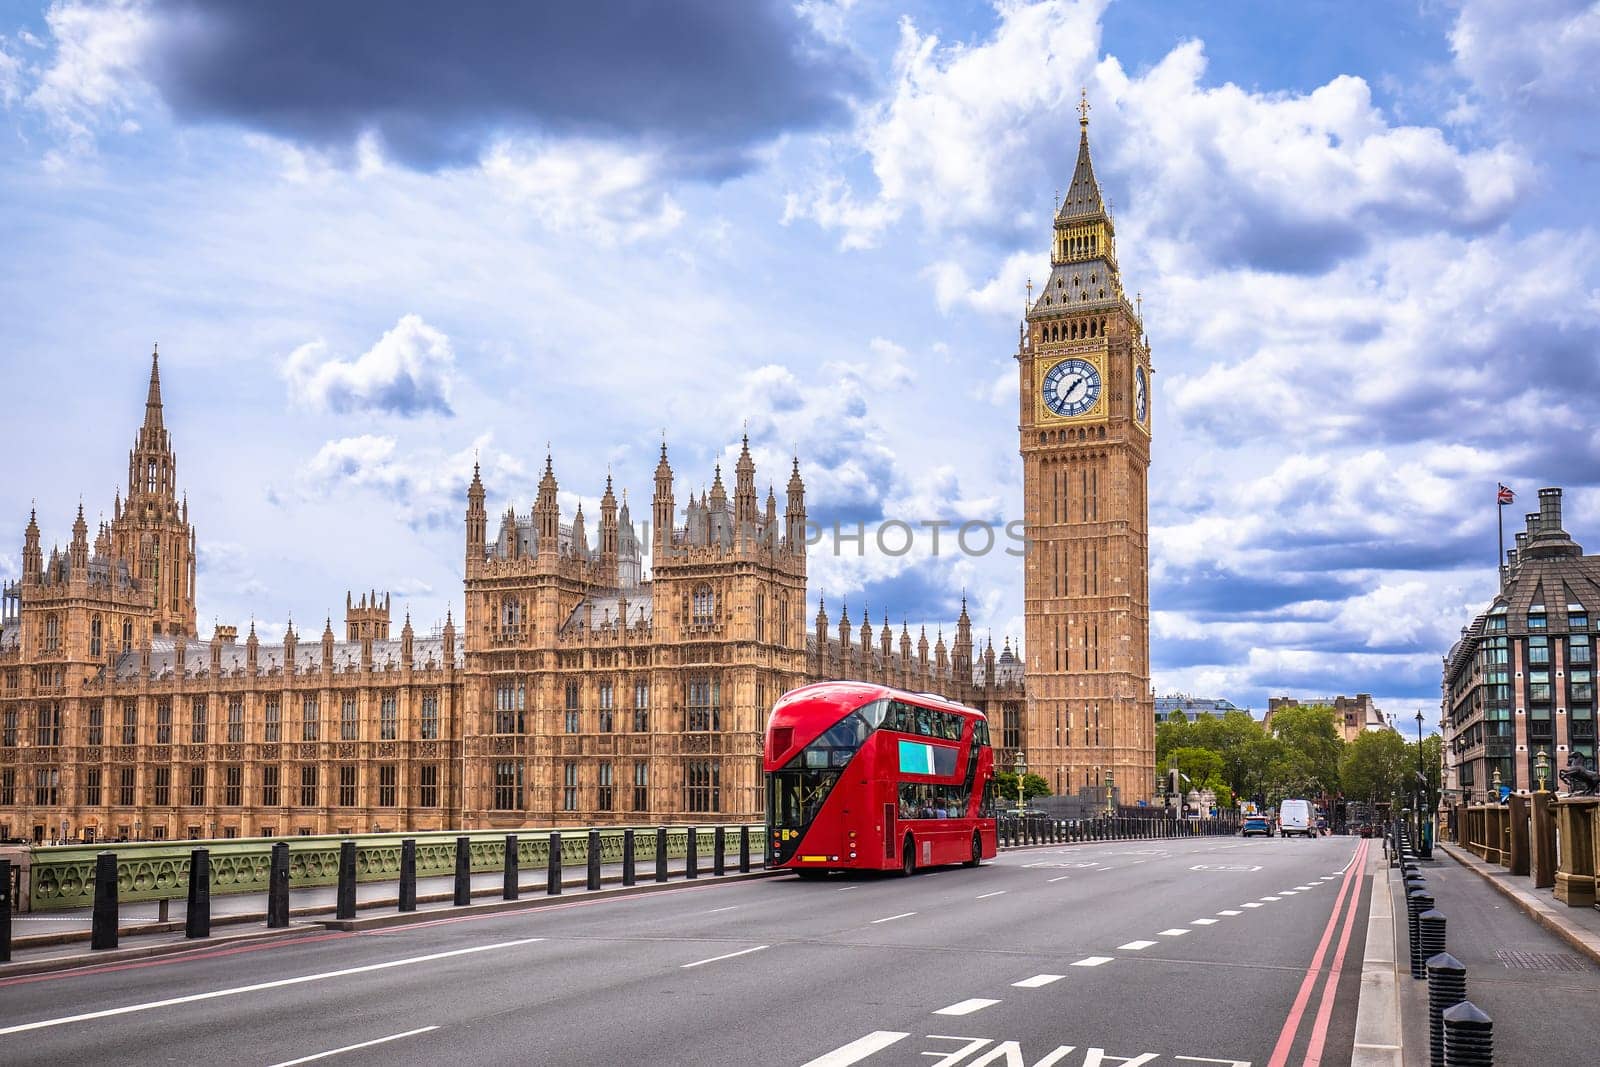 Palace of Westminster and Big Ben view from Thames river bridge, capital of UK famous landmark